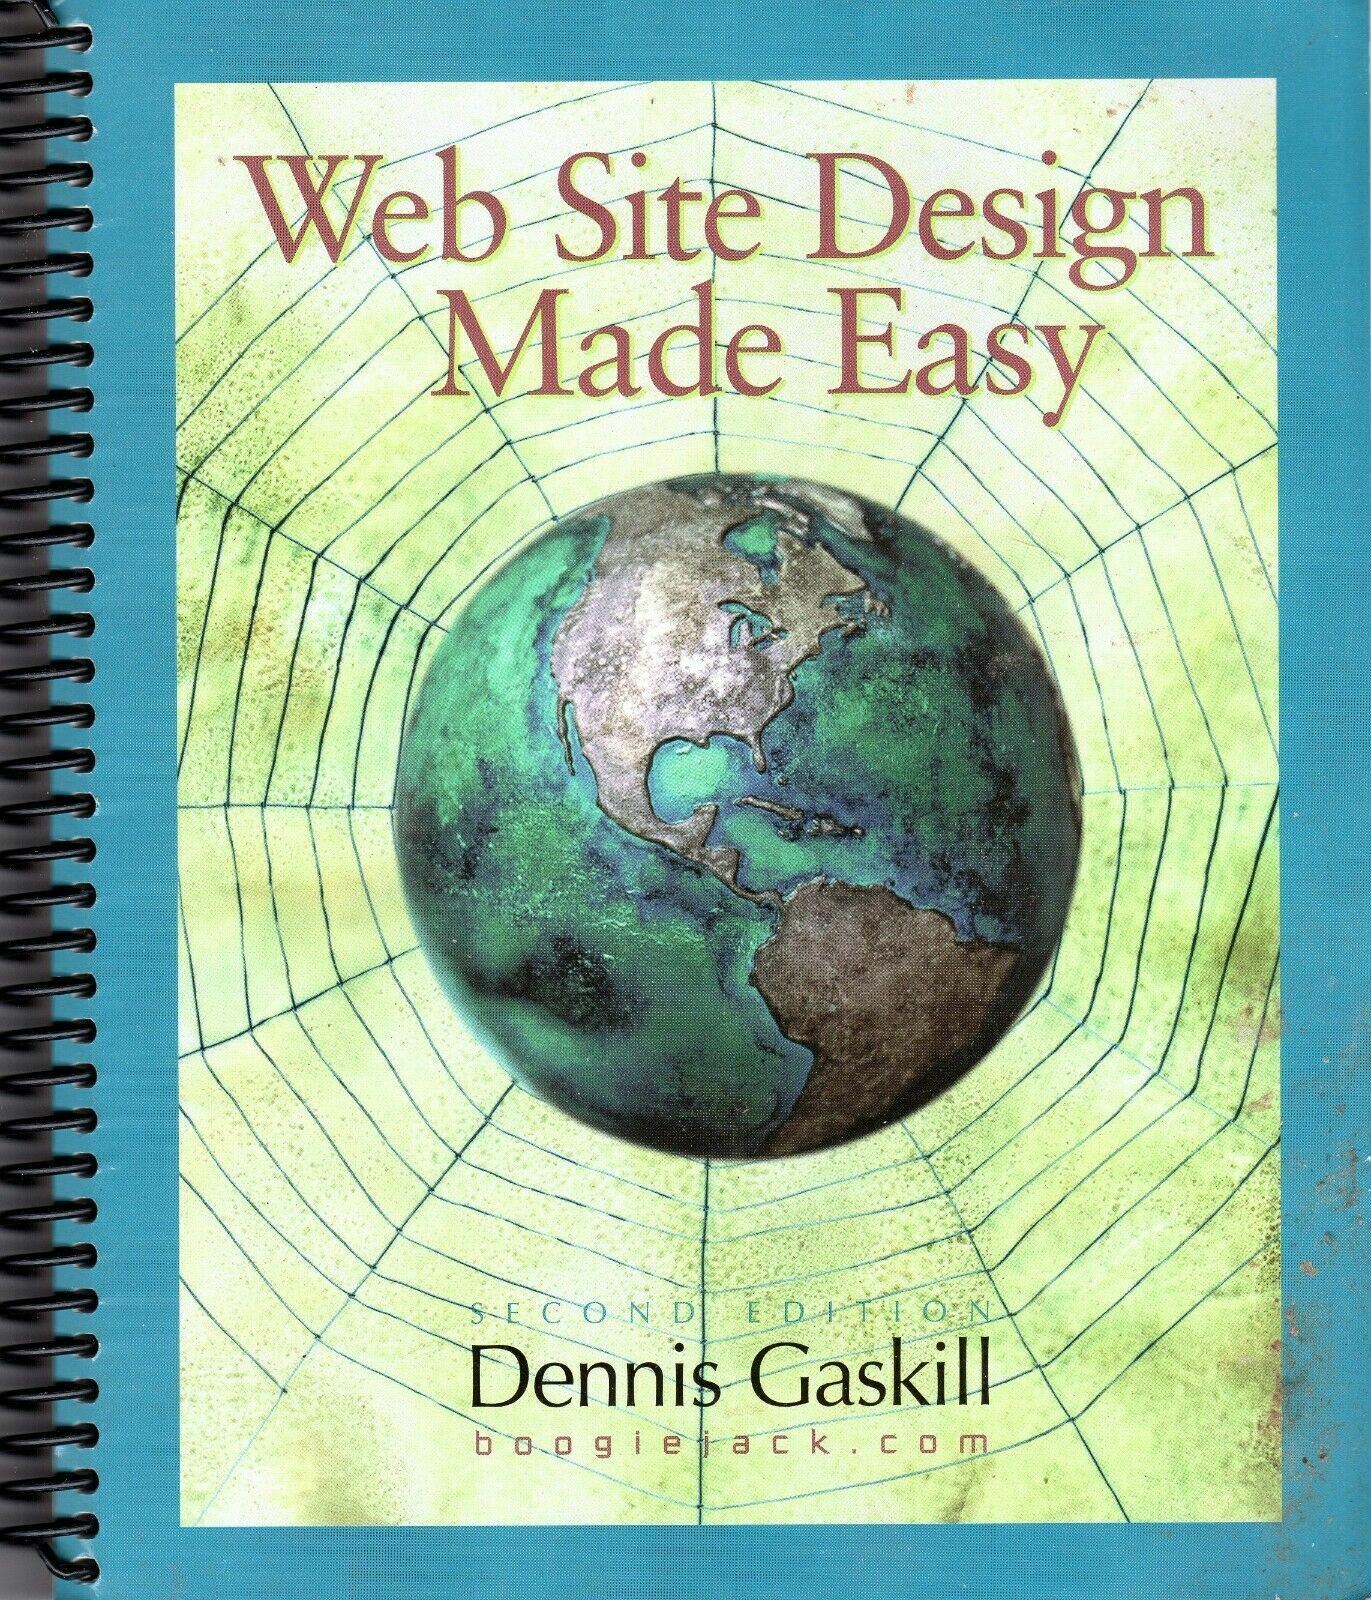 ITHistory (2004) BOOK: WEB SITE DESIGN MADE EASY 2nd Ed (Dennis Gaskill IB